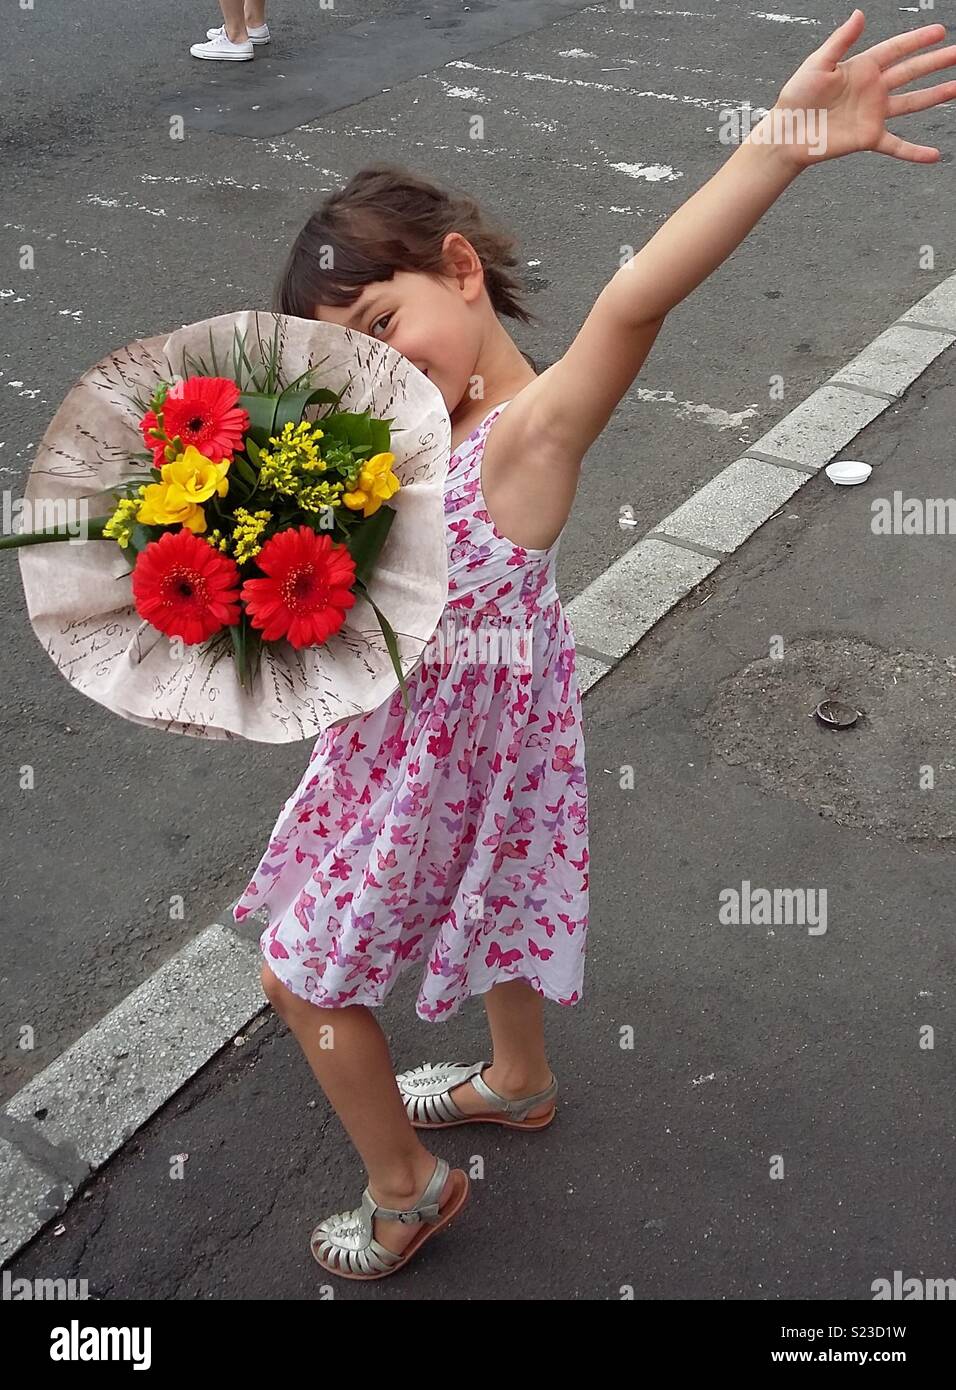 Girl in dress with bouquet of flowers Stock Photo